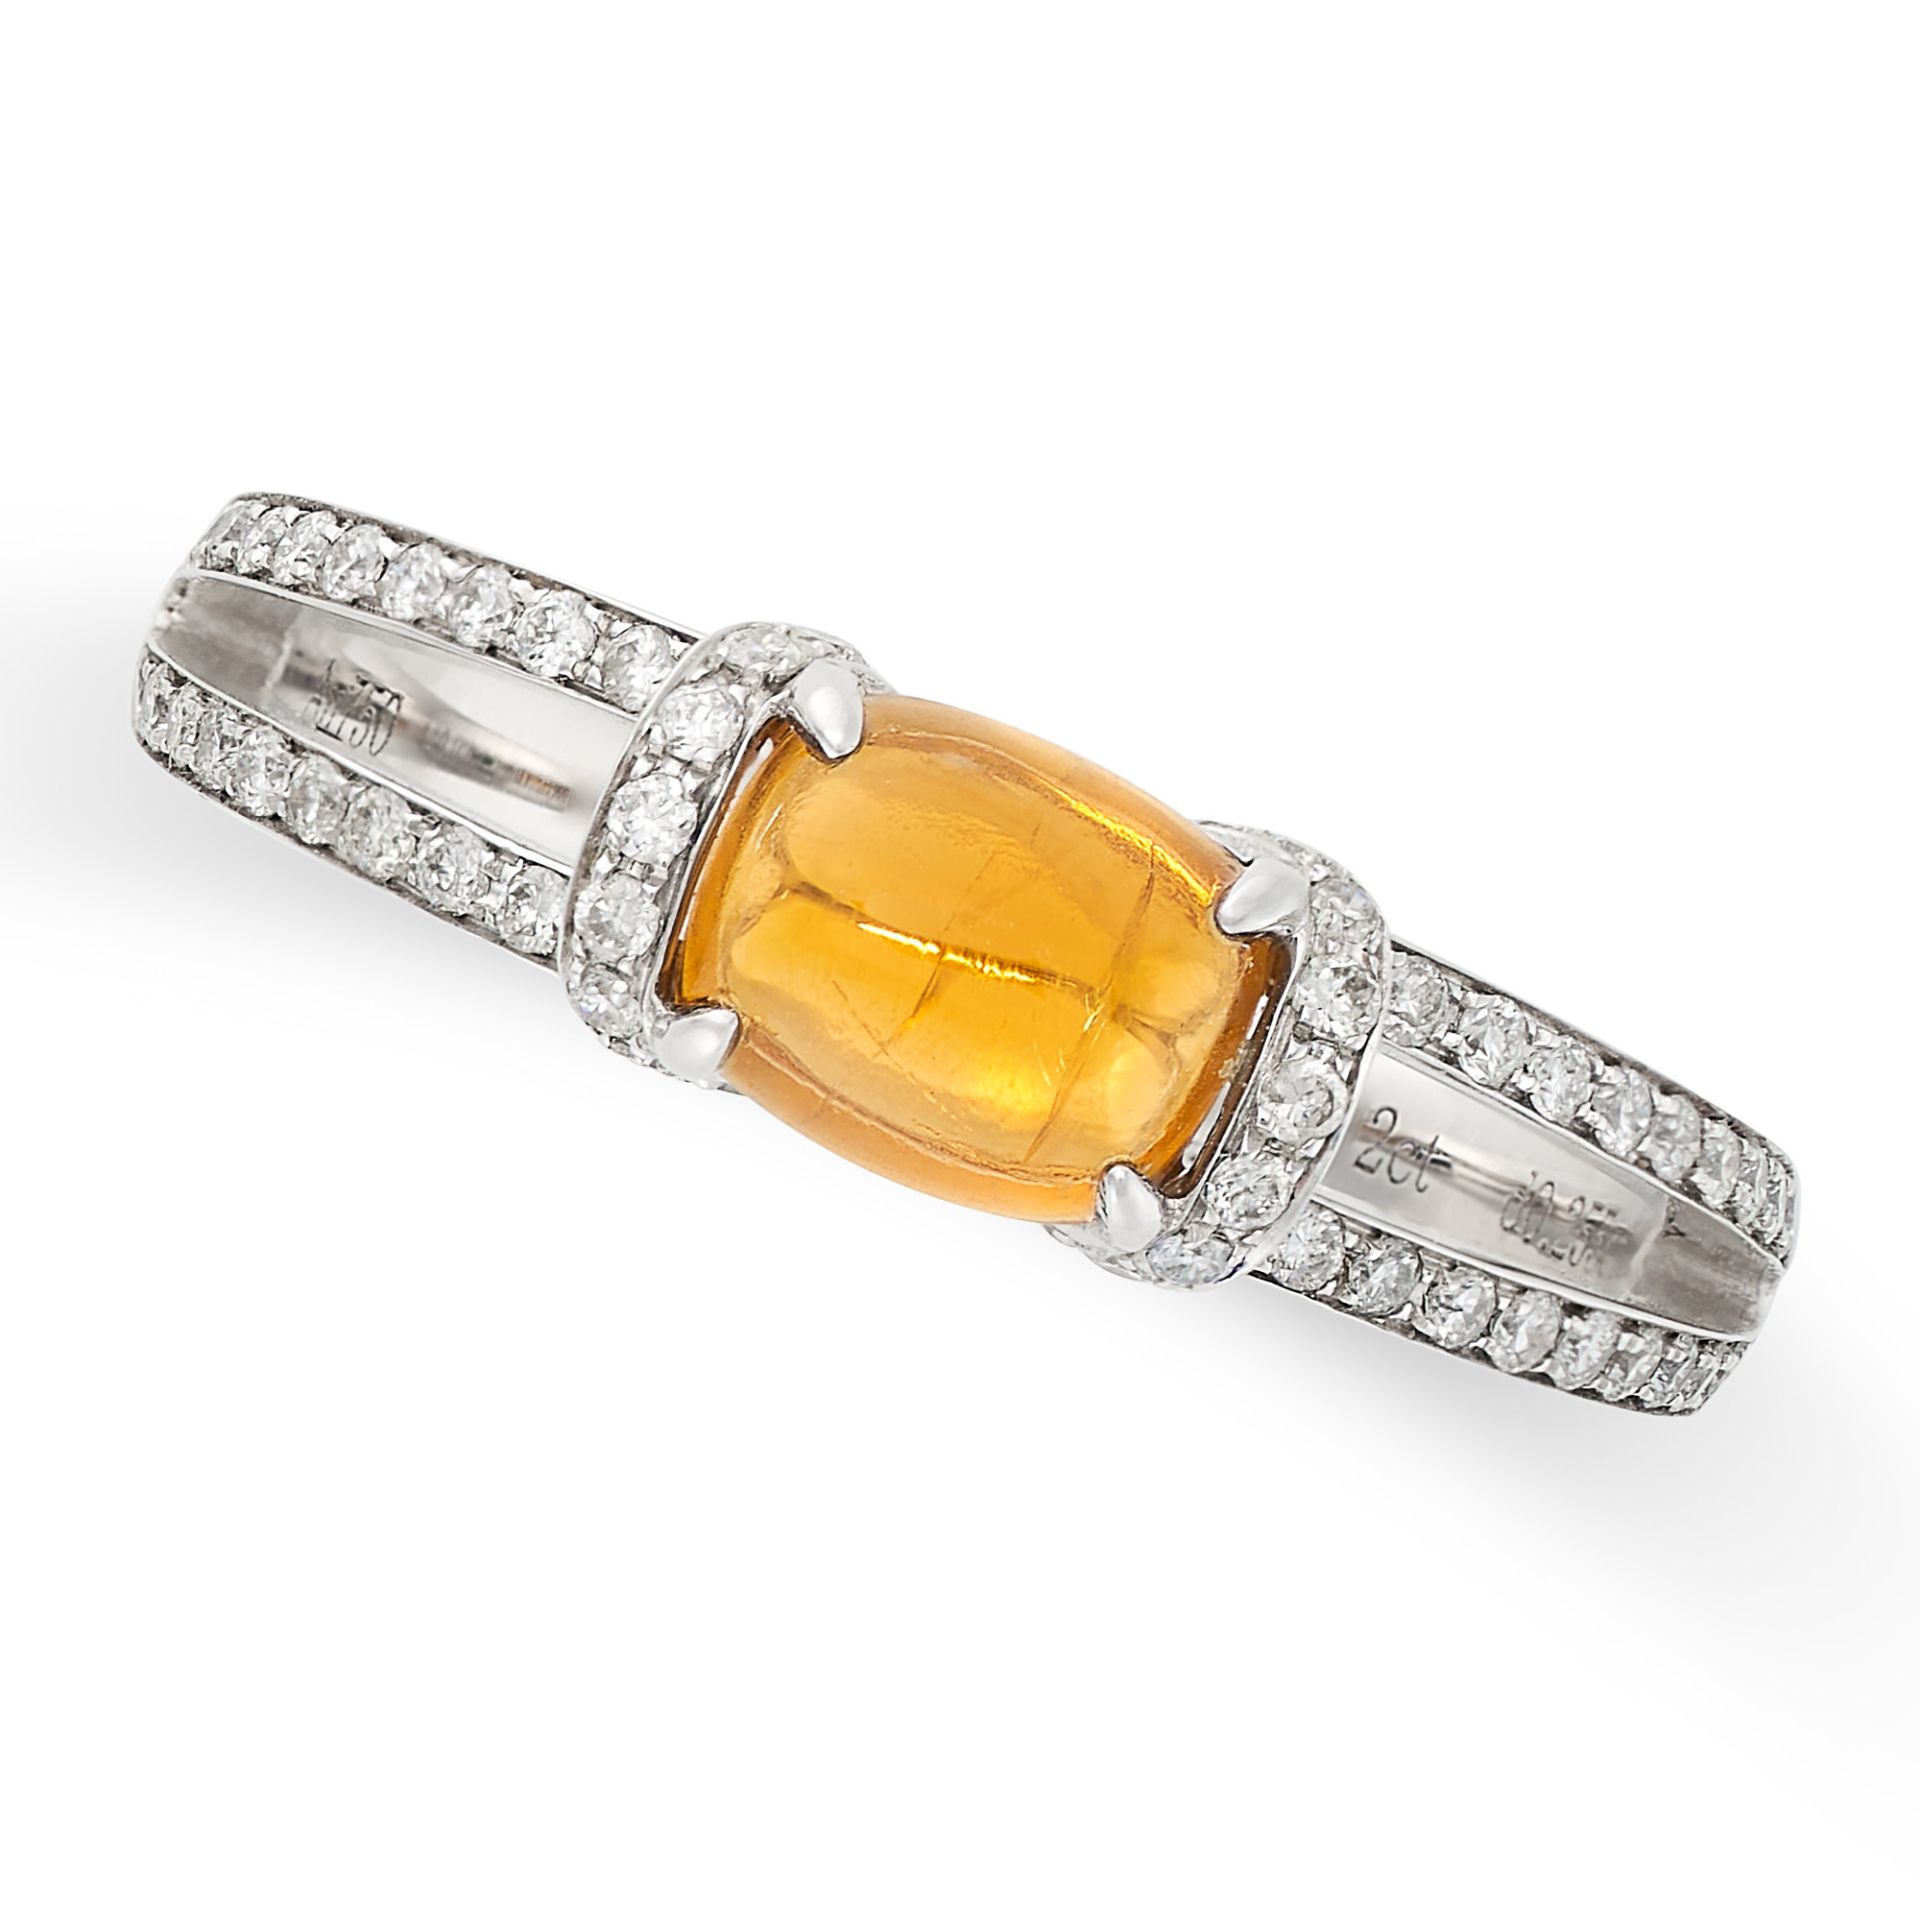 A YELLOW GARNET AND DIAMOND RING in 18ct white gold, set with a cabochon yellow garnet of 0.92